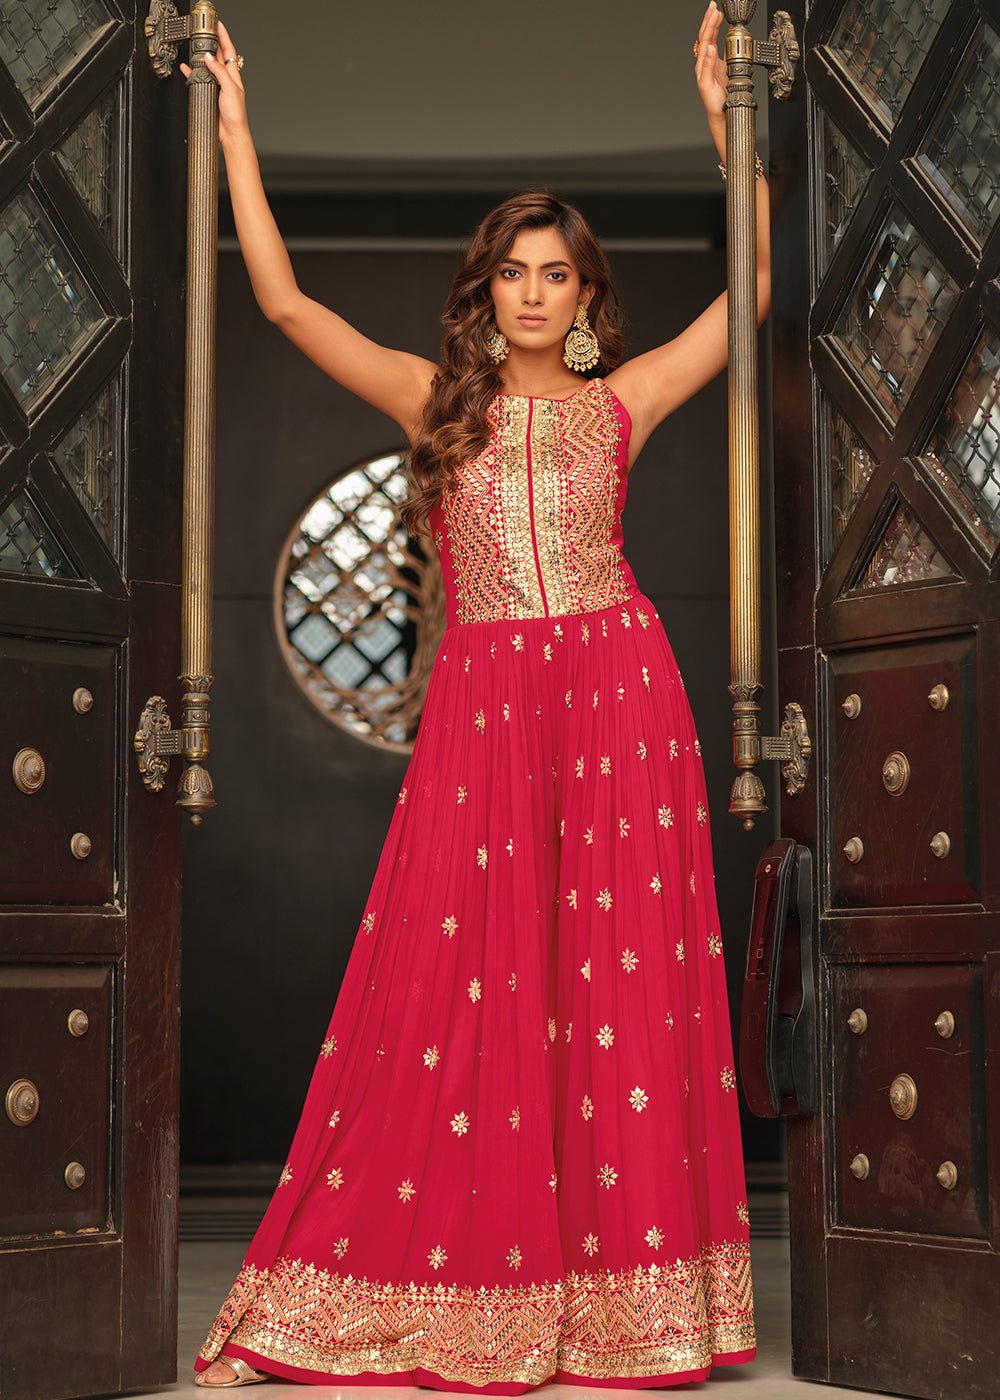 Buy Now Hot Pink Indo-Western Embroidered Jumpsuit Online in USA, UK, Canada, Germany & Worldwide at Empress Clothing. 